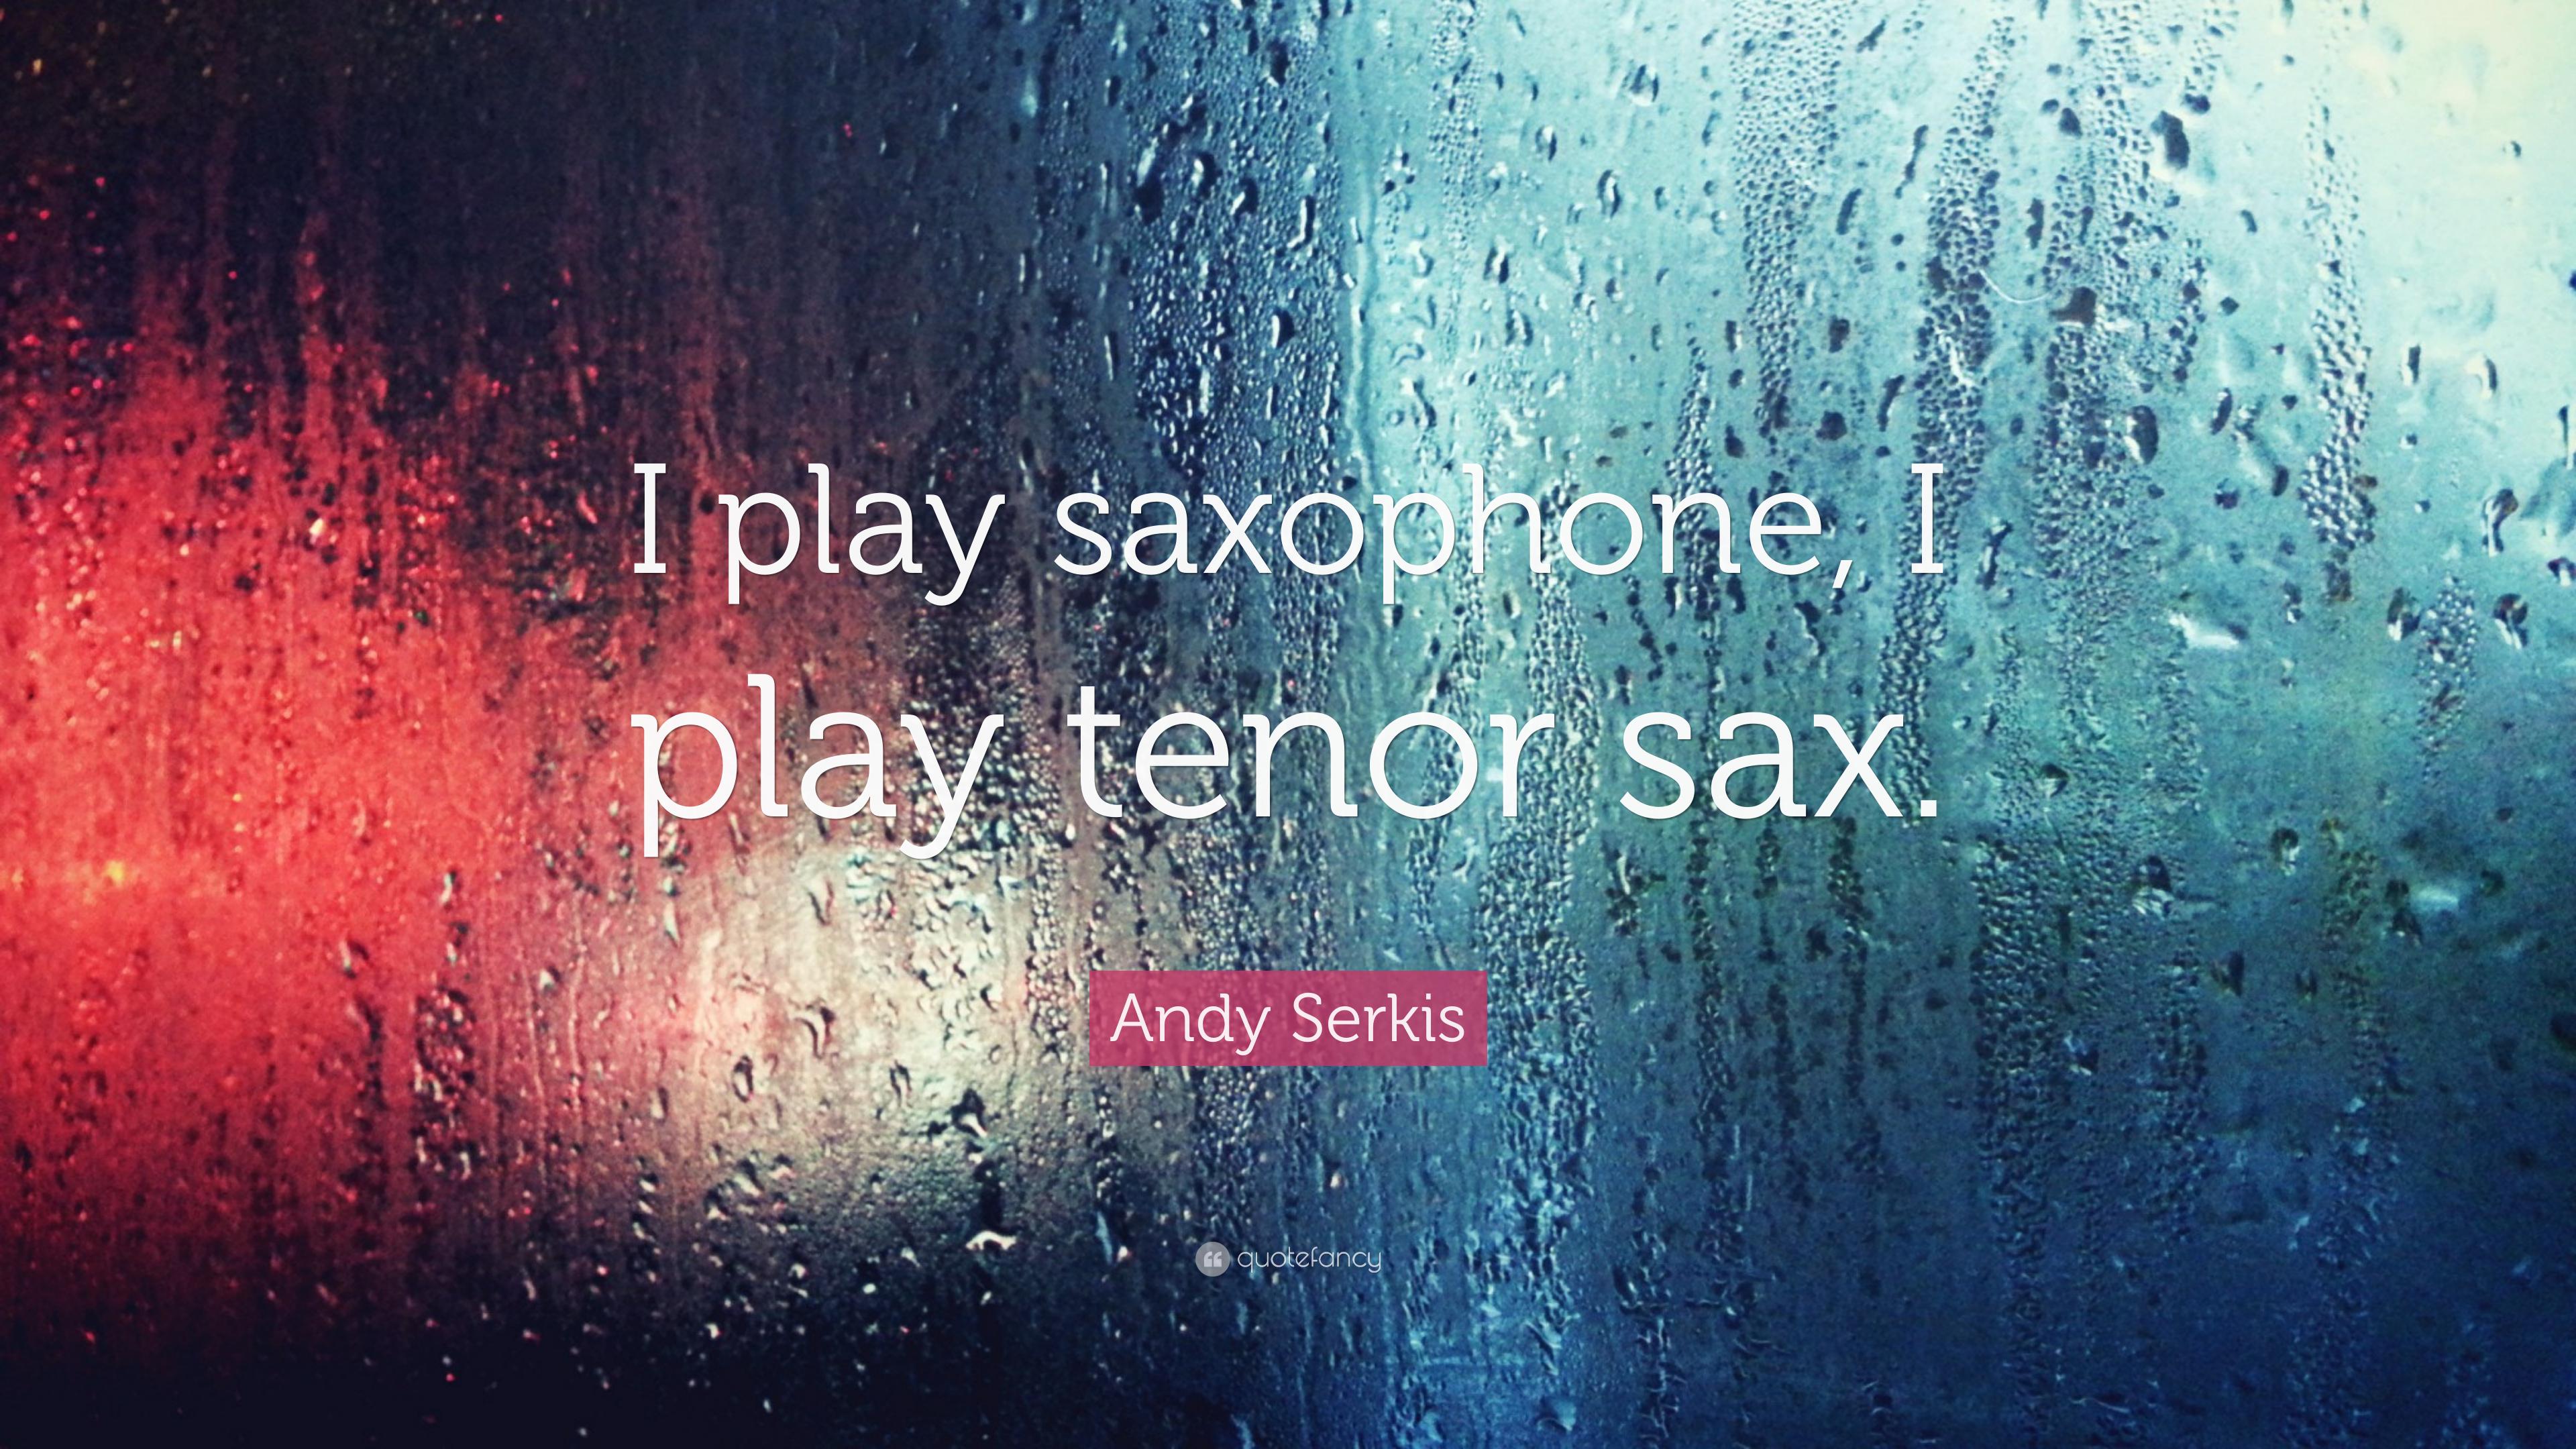 Andy Serkis Quote: “I play saxophone, I play tenor sax.” 7